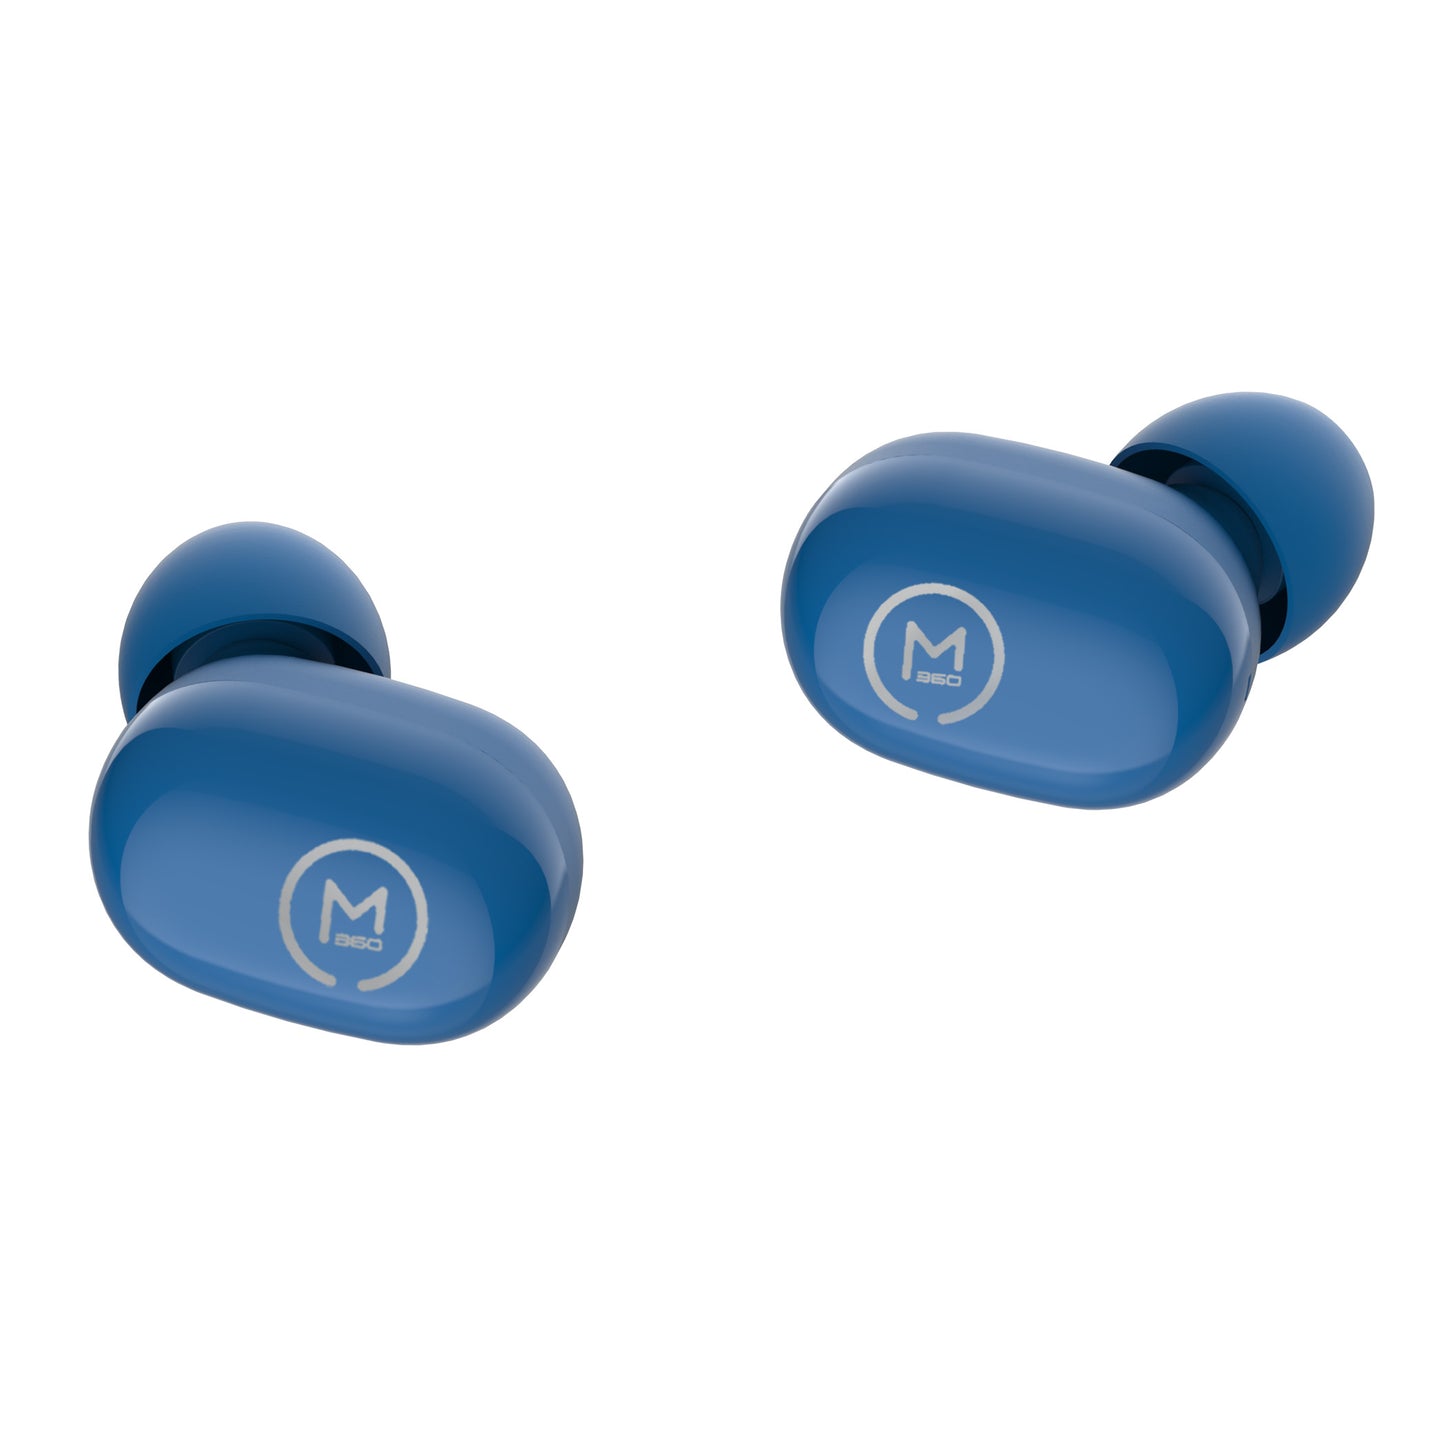 Photo of Morpheus 360 Spire True Wireless Earbuds Blue left and right button earbuds.